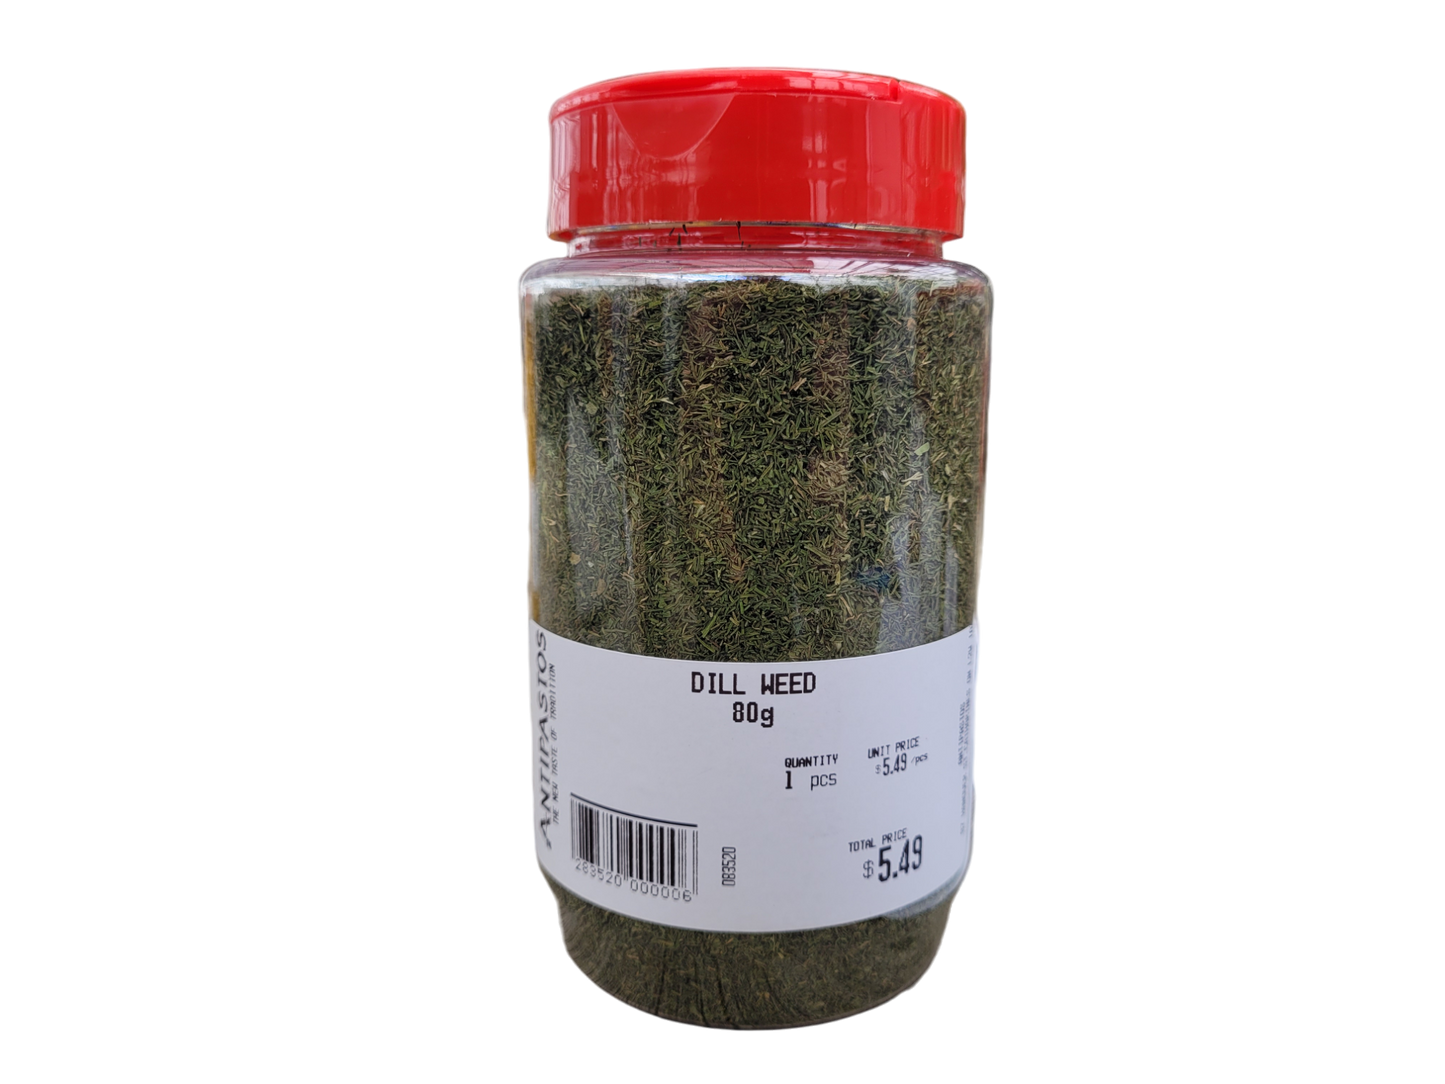 Dill Weed 80g